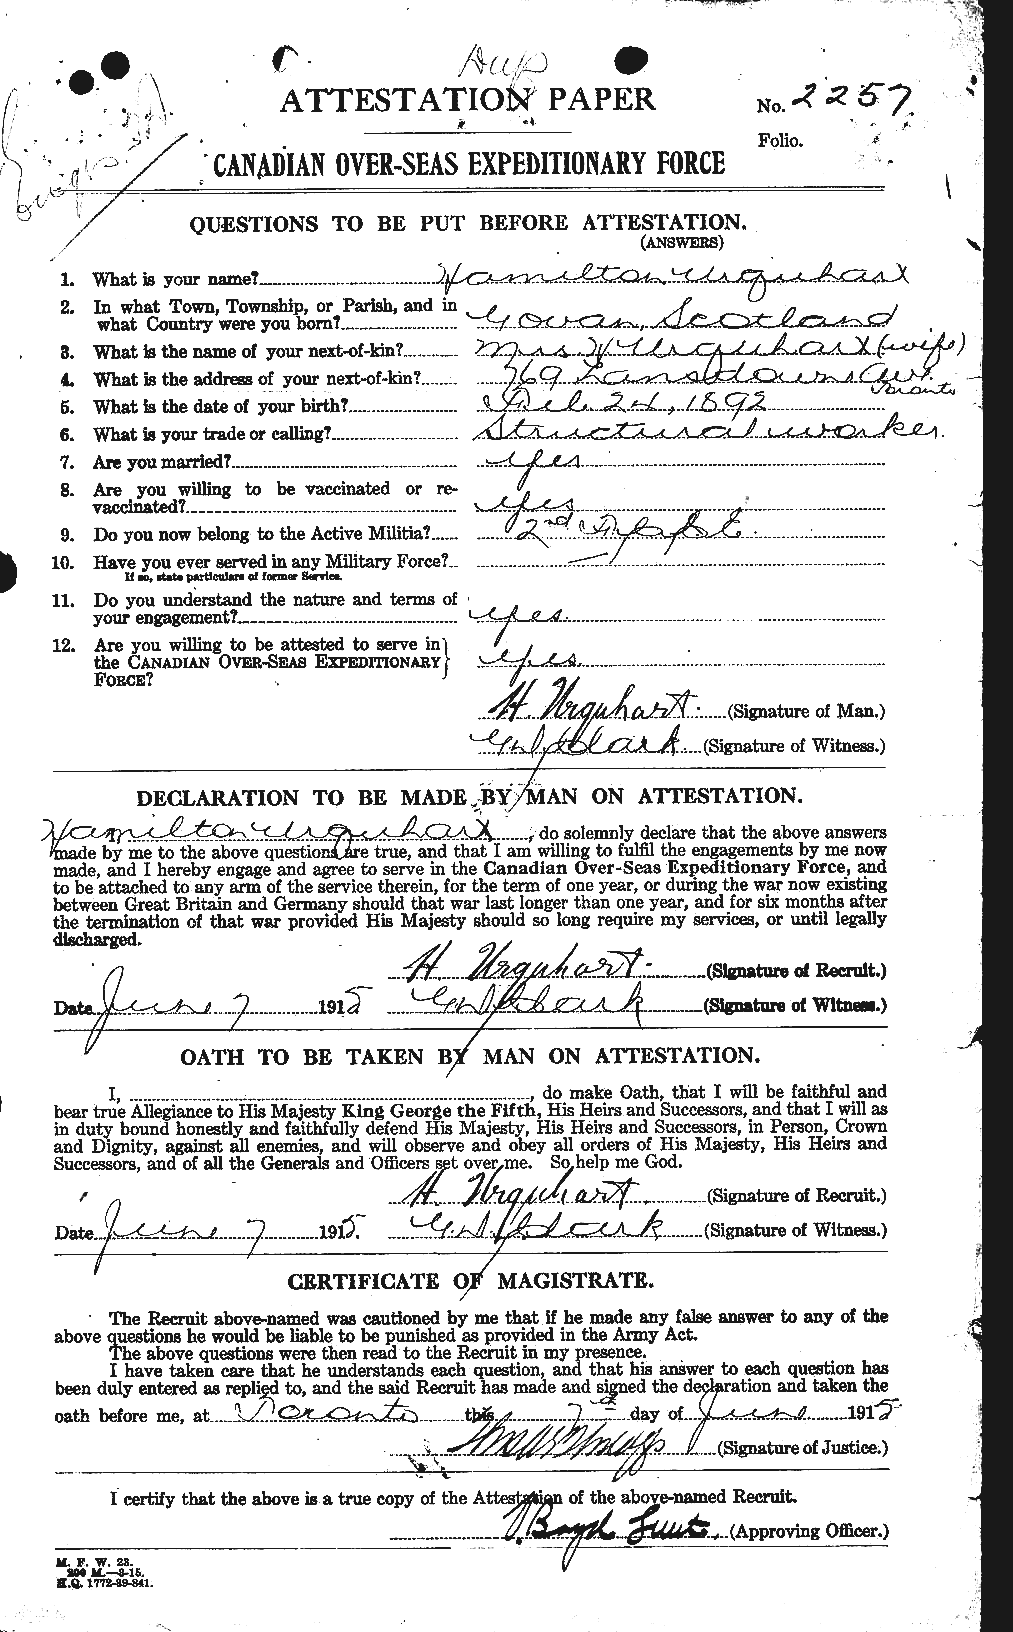 Personnel Records of the First World War - CEF 643340a